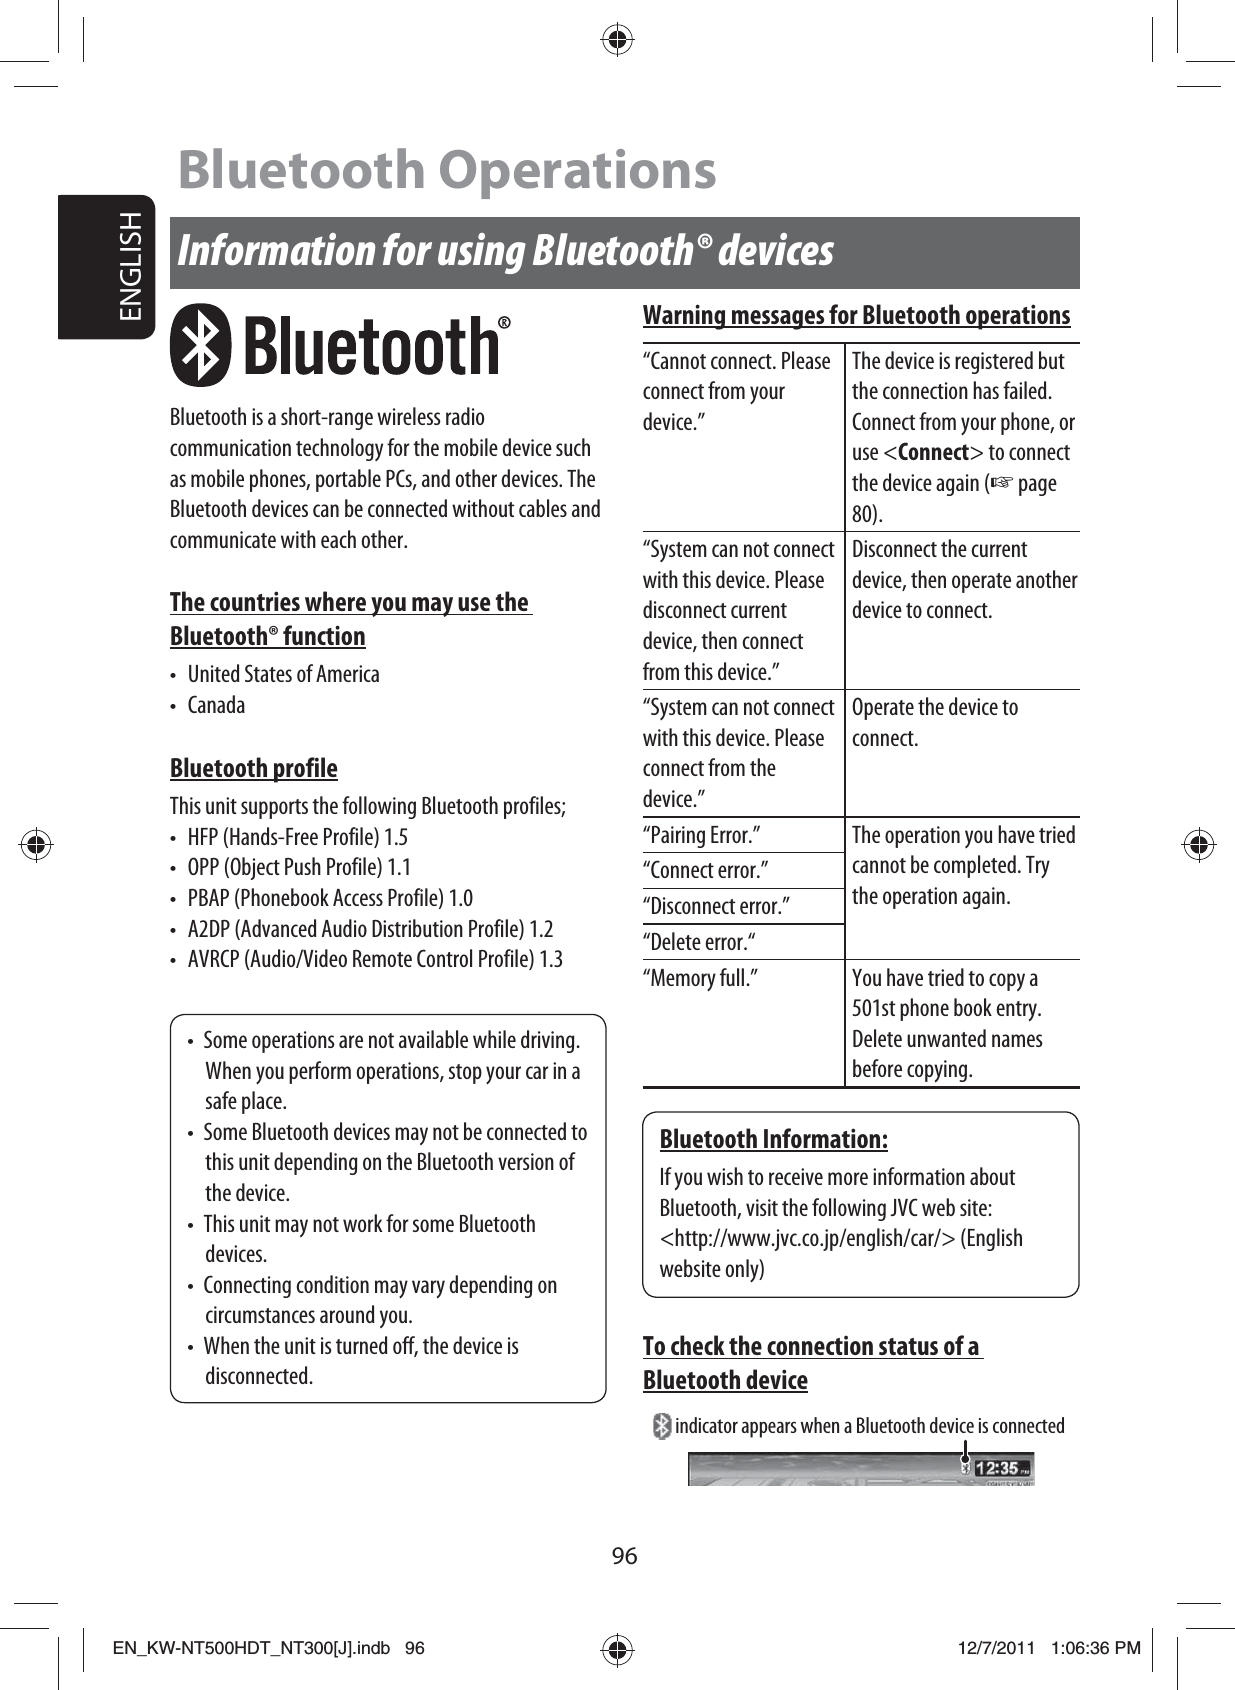 96ENGLISHInformation for using Bluetooth® devicesBluetooth is a short-range wireless radio communication technology for the mobile device such as mobile phones, portable PCs, and other devices. The Bluetooth devices can be connected without cables and communicate with each other.The countries where you may use the Bluetooth® function•  United States of America• CanadaBluetooth profileThis unit supports the following Bluetooth profiles;•  HFP (Hands-Free Profile) 1.5•  OPP (Object Push Profile) 1.1•  PBAP (Phonebook Access Profile) 1.0•  A2DP (Advanced Audio Distribution Profile) 1.2•  AVRCP (Audio/Video Remote Control Profile) 1.3•  Some operations are not available while driving. When you perform operations, stop your car in a safe place.•  Some Bluetooth devices may not be connected to this unit depending on the Bluetooth version of the device.•  This unit may not work for some Bluetooth devices.•  Connecting condition may vary depending on circumstances around you.•  When the unit is turned off, the device is disconnected.Bluetooth Information:If you wish to receive more information about Bluetooth, visit the following JVC web site:&lt;http://www.jvc.co.jp/english/car/&gt; (English website only)Warning messages for Bluetooth operations“Cannot connect. Please connect from your device.”The device is registered but the connection has failed. Connect from your phone, or use &lt;Connect&gt; to connect the device again (☞ page 80).“System can not connect with this device. Please disconnect current device, then connect from this device.”Disconnect the current device, then operate another device to connect.“System can not connect with this device. Please connect from the device.”Operate the device to connect.“Pairing Error.” The operation you have tried cannot be completed. Try the operation again.“Connect error.”“Disconnect error.”“Delete error.““Memory full.” You have tried to copy a 501st phone book entry. Delete unwanted names before copying.To check the connection status of a Bluetooth device indicator appears when a Bluetooth device is connectedBluetooth OperationsEN_KW-NT500HDT_NT300[J].indb   96EN_KW-NT500HDT_NT300[J].indb   9612/7/2011   1:06:36 PM12/7/2011   1:06:36 PM